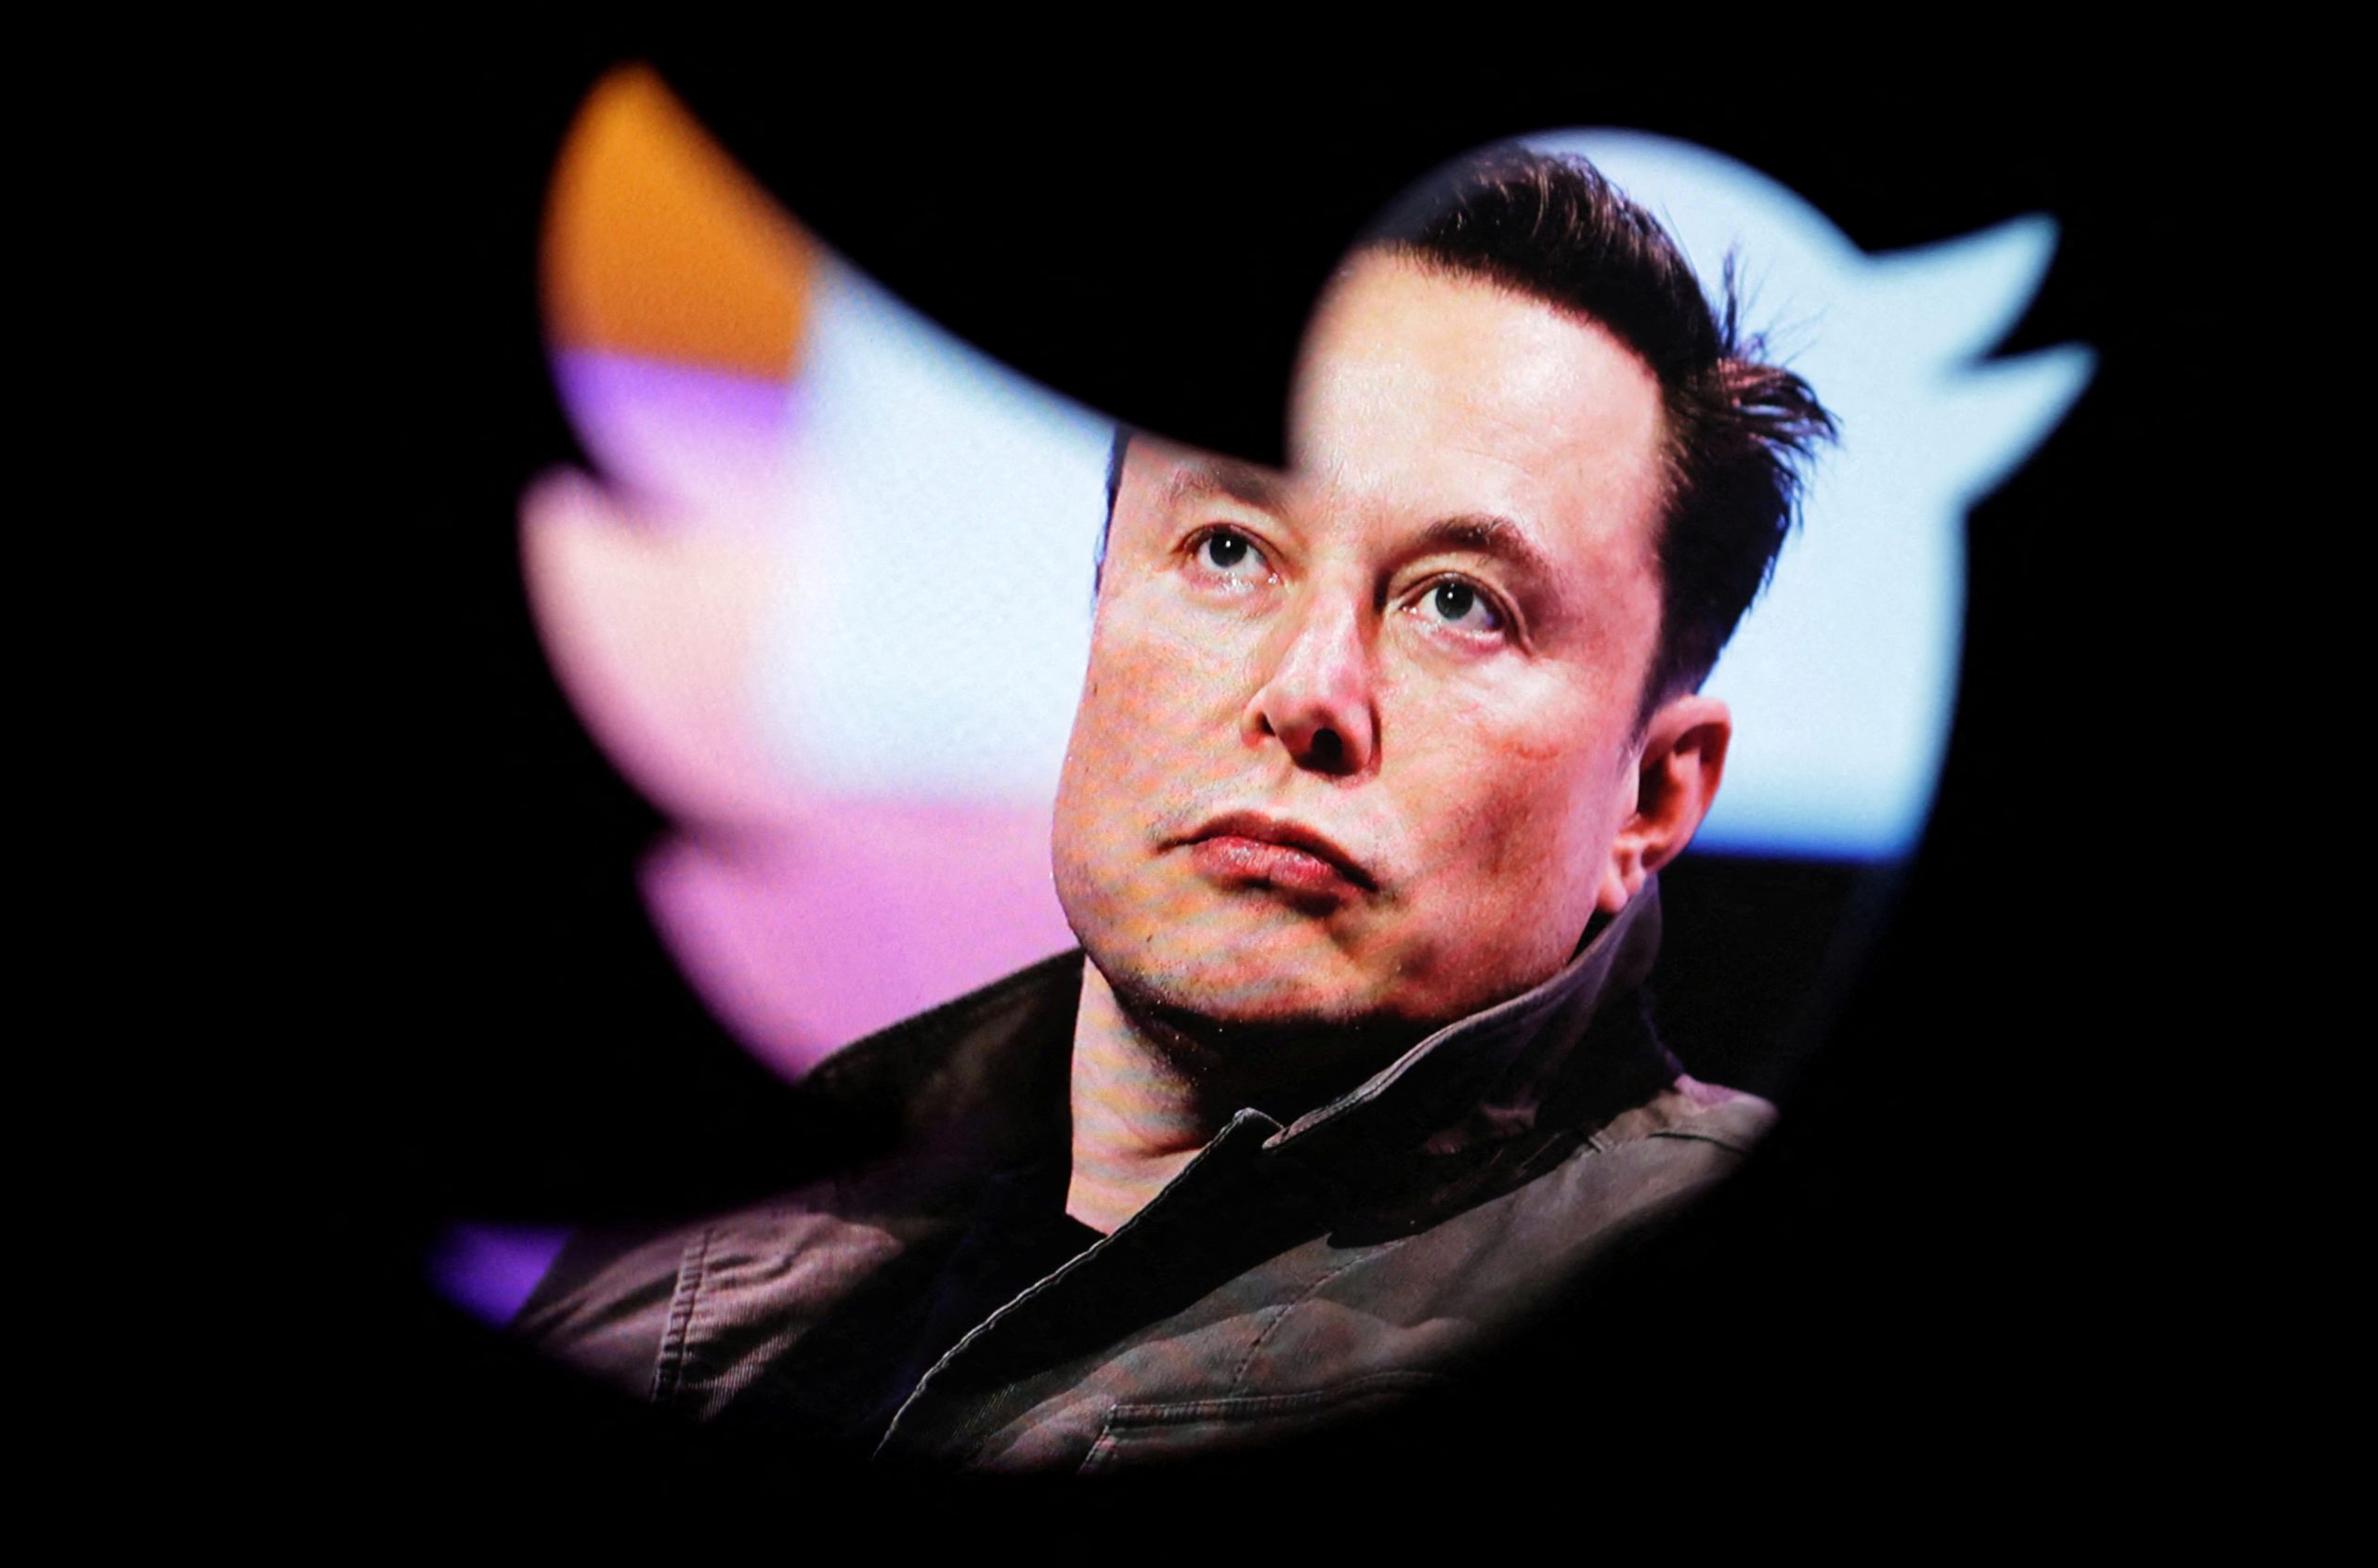 Twitter's blue bird logo to be replaced by an X, says Elon Musk